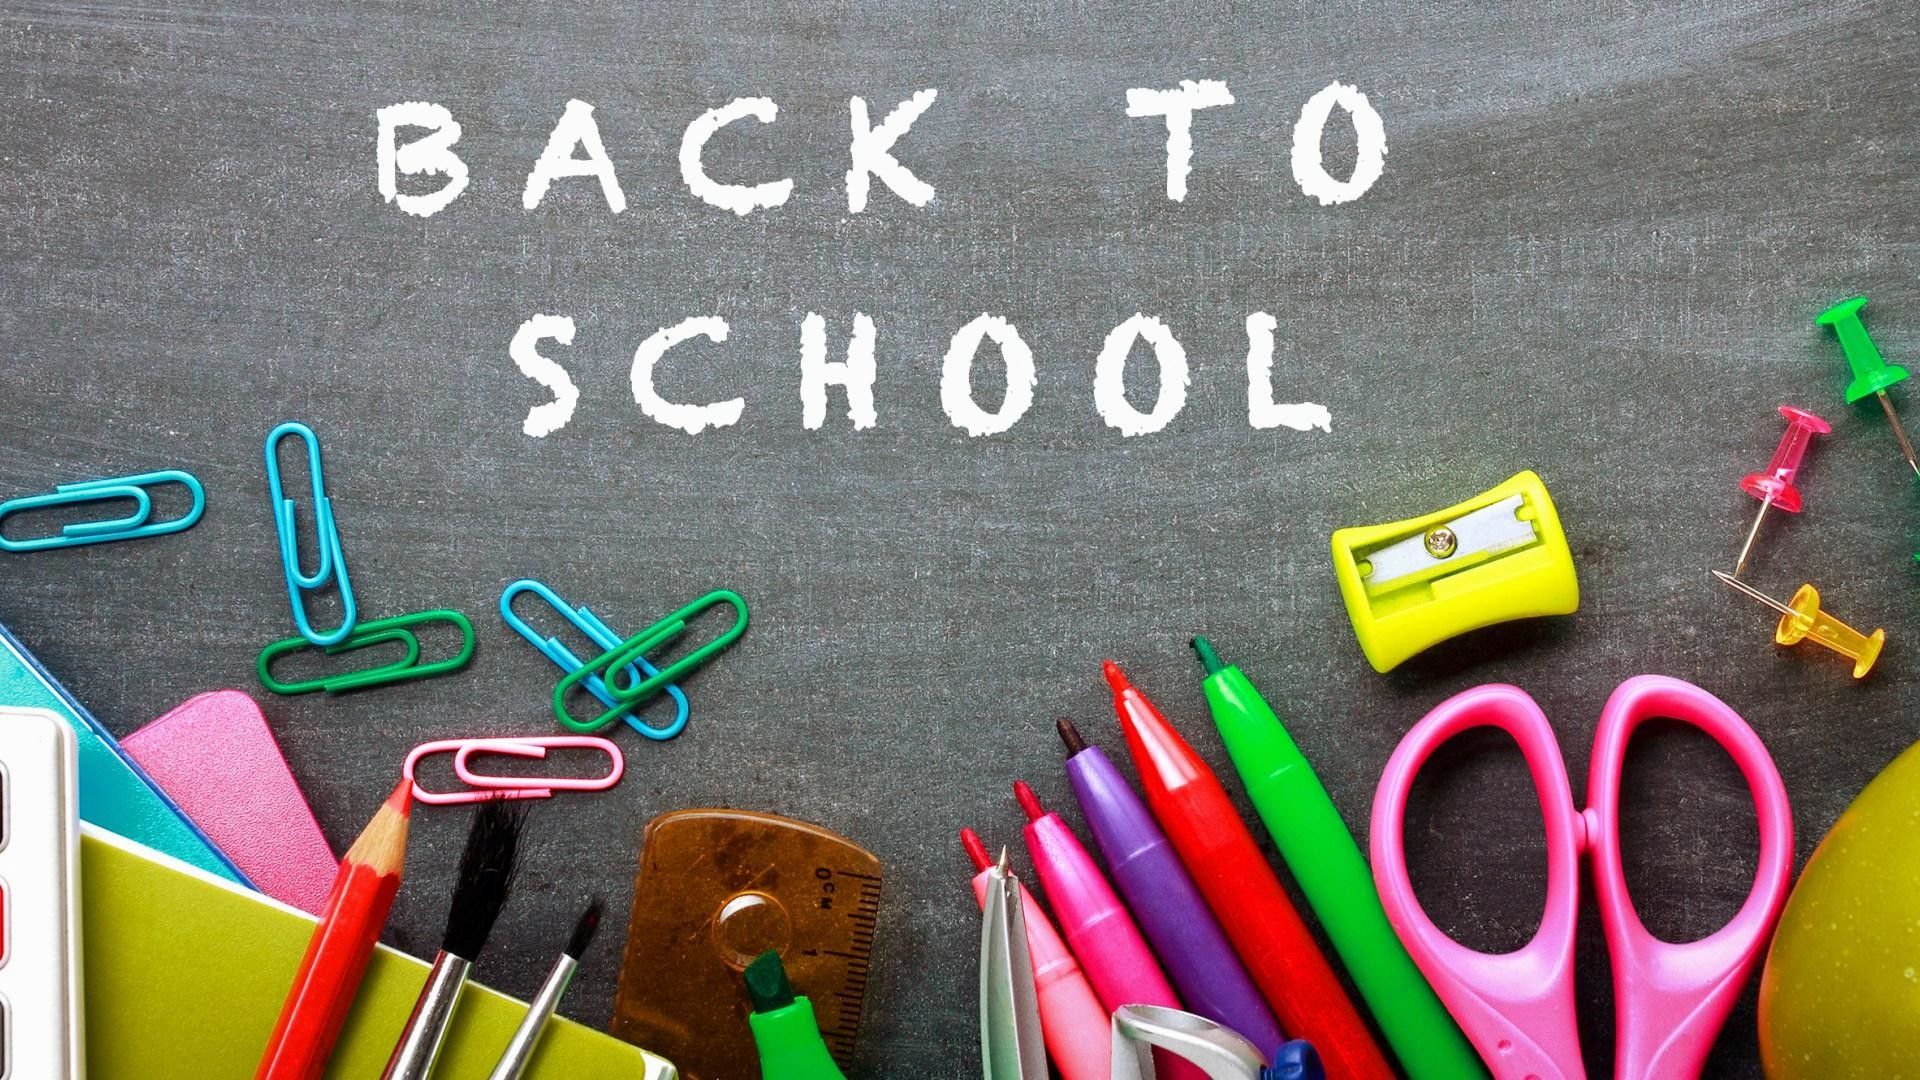 Back to School Wallpapers   Top Back to School Backgrounds 1920x1080